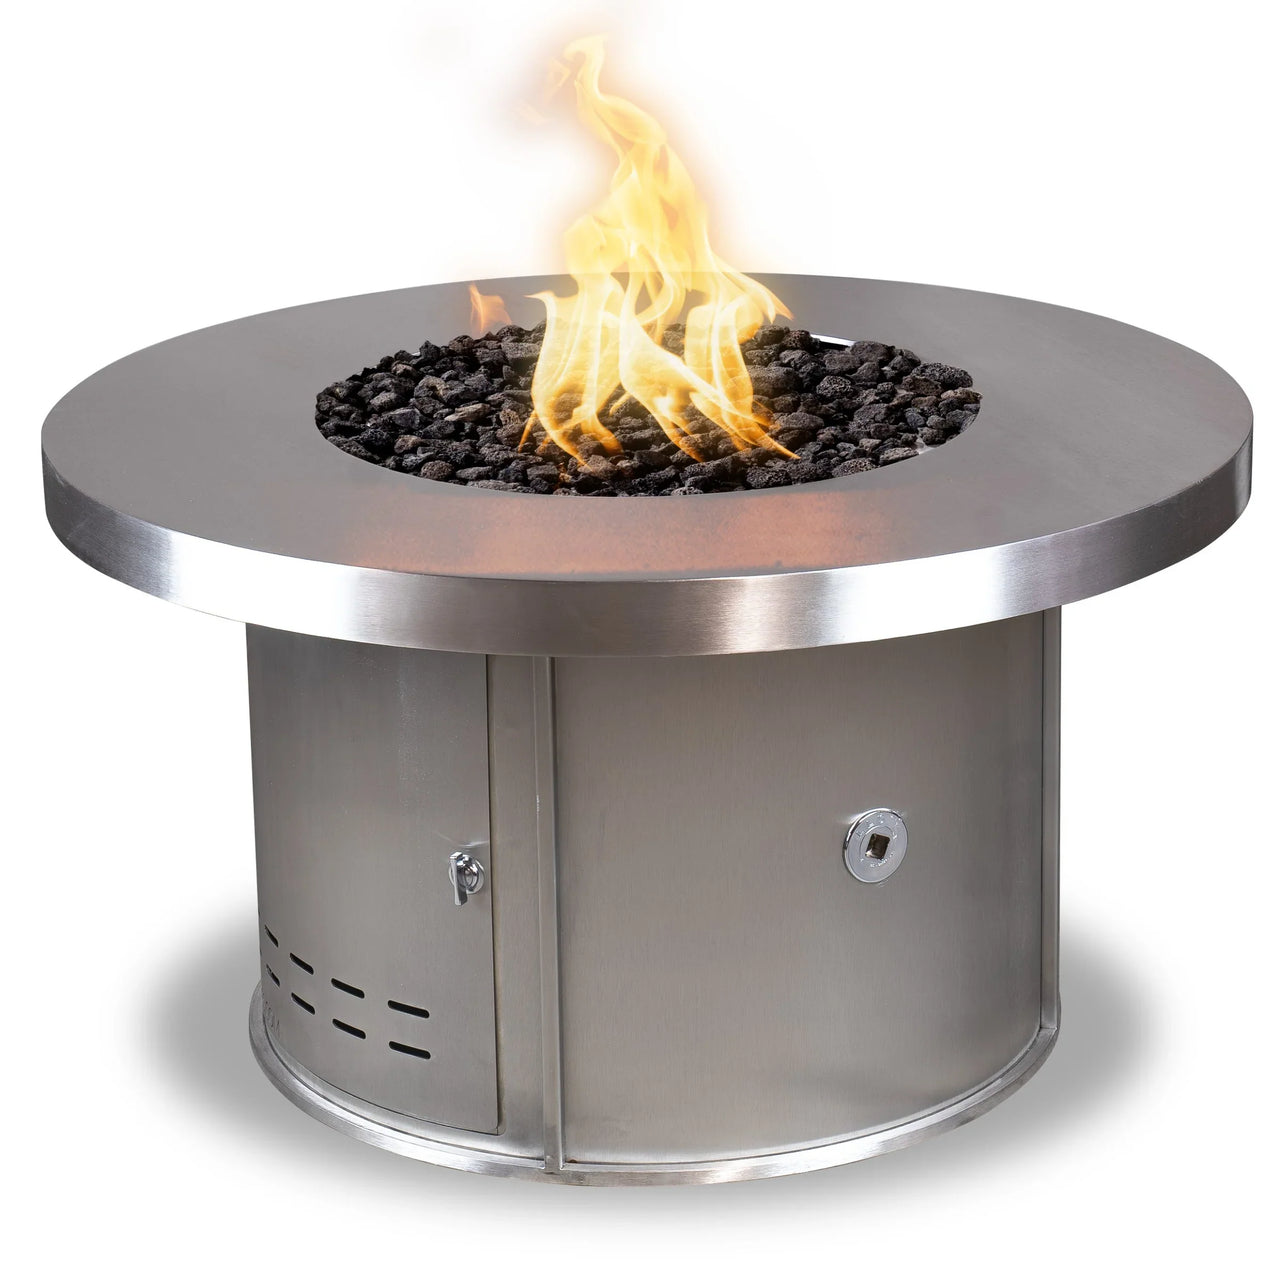 The Outdoor Plus 48" Round Mabel Stainless Steel Fire Table